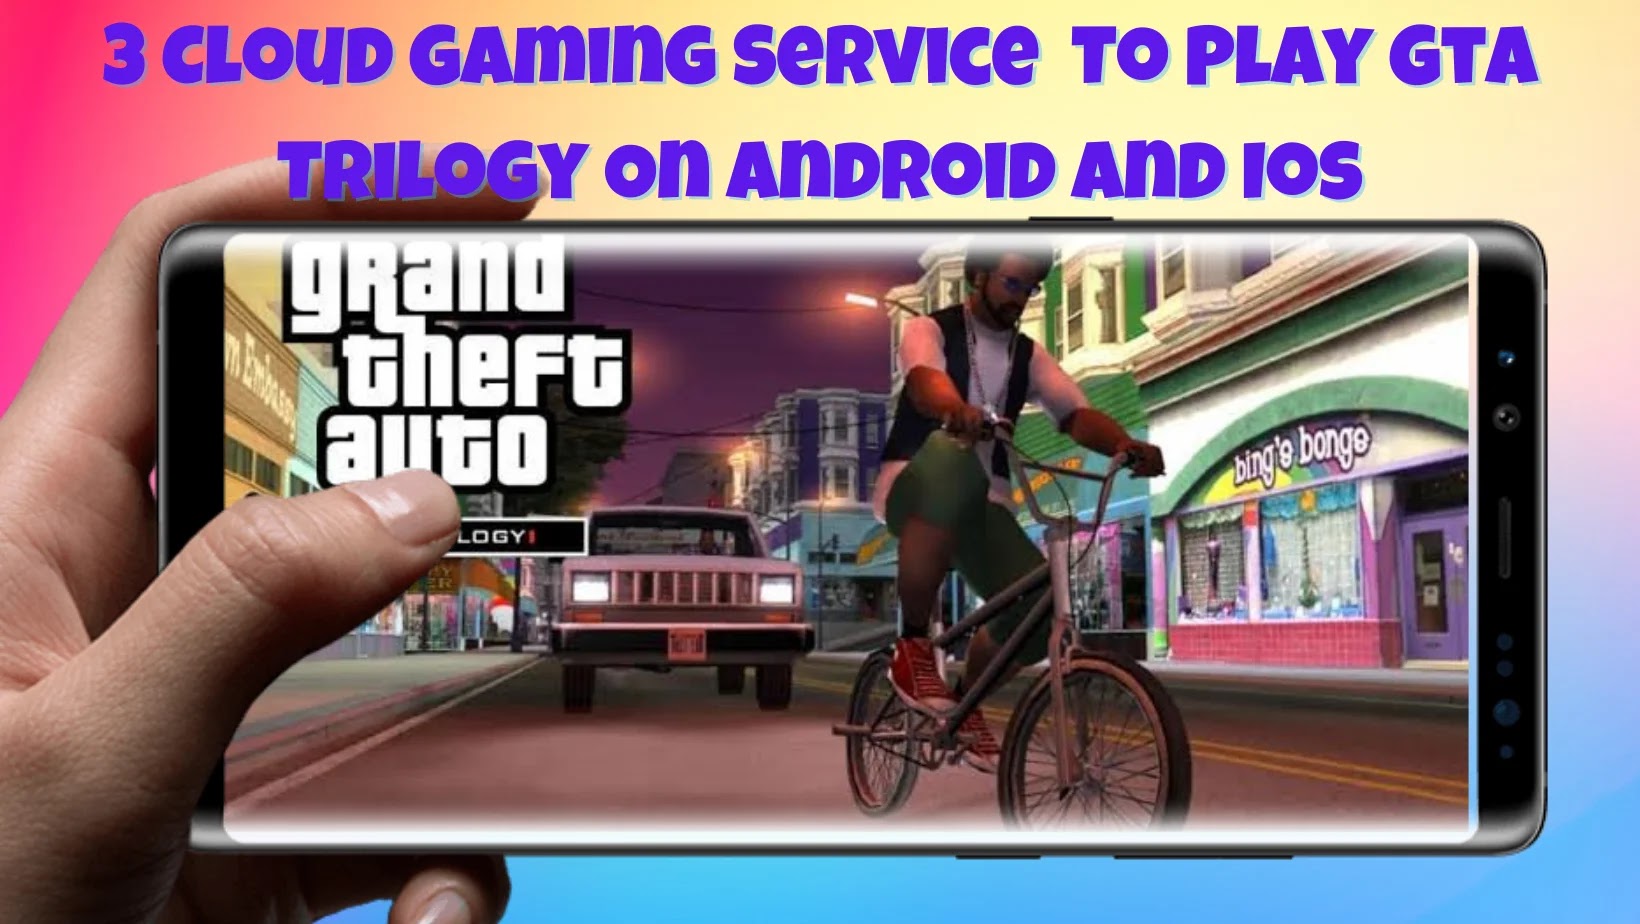 gta trilogy on android, gta trilogy for android and ios, gta trilogy realease date for android and ios